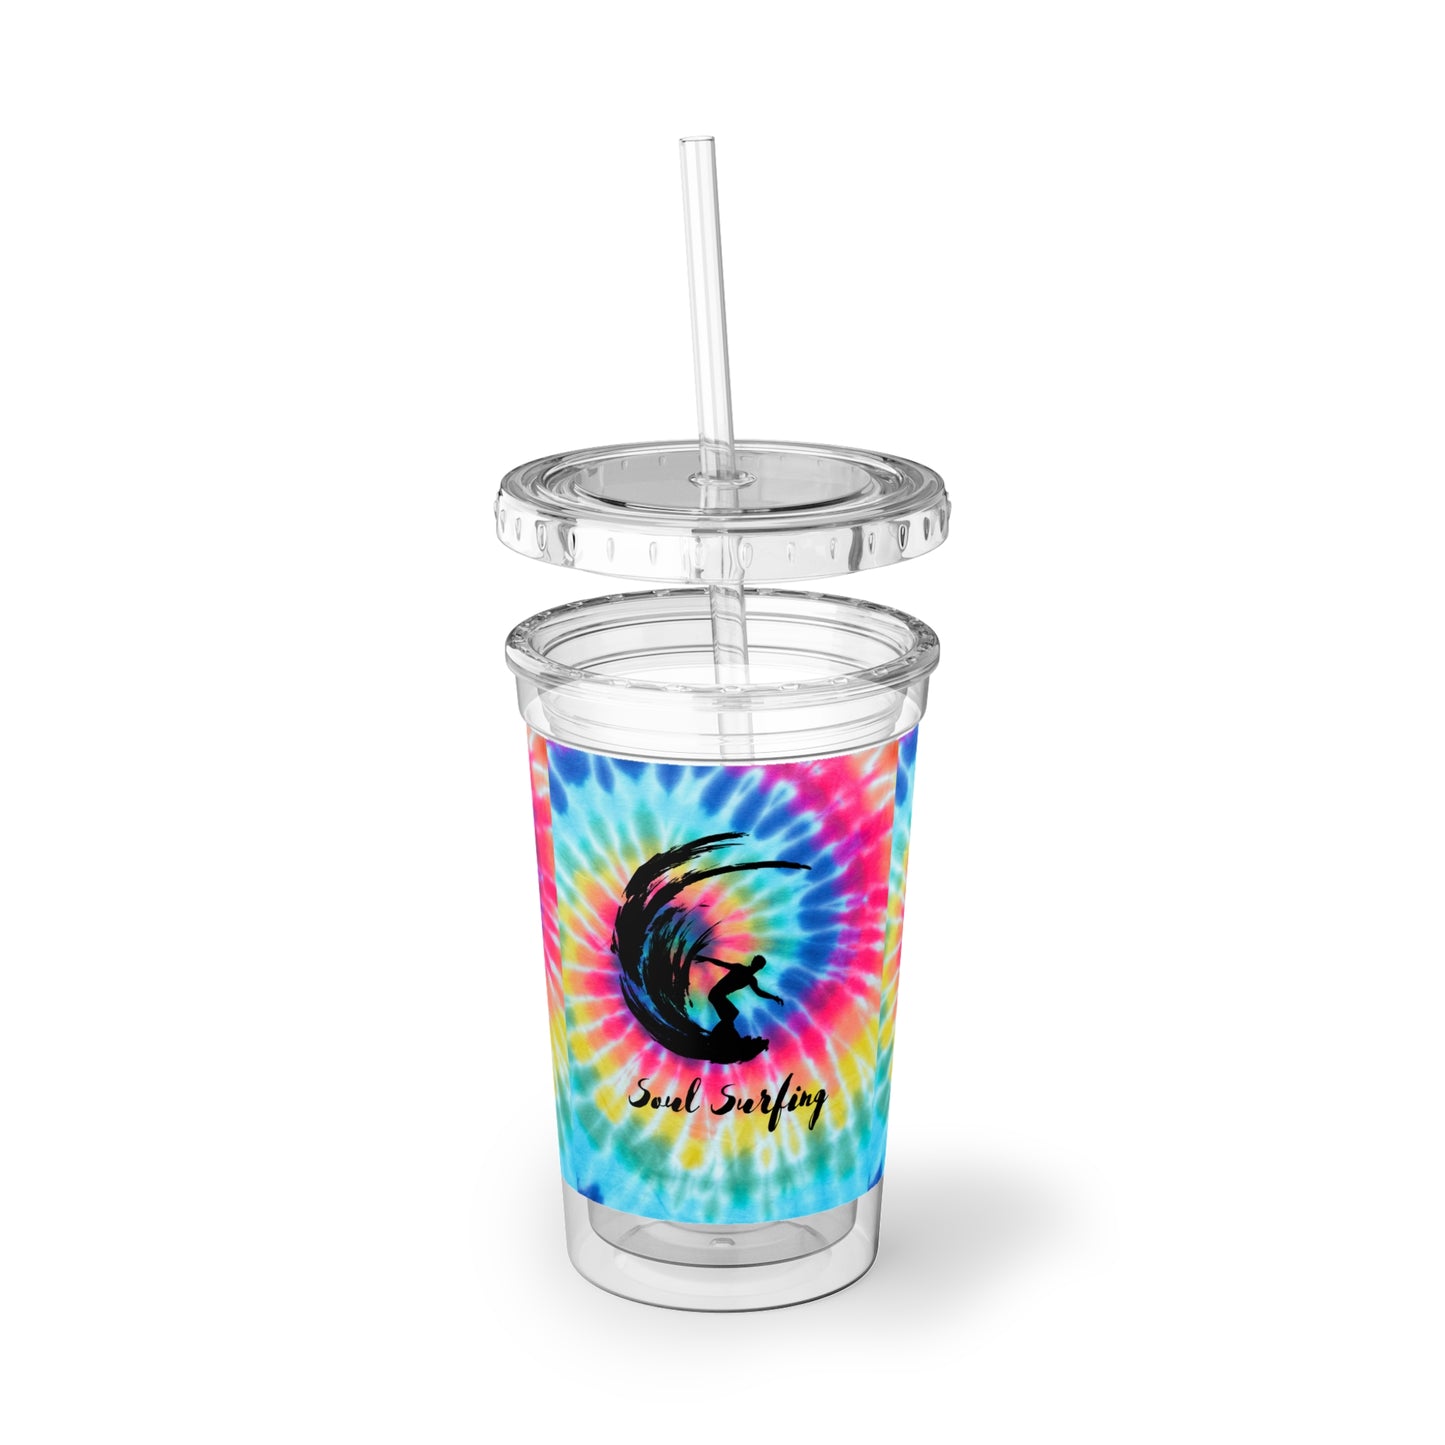 Soul Surfing Tie Dye Surfing Hang Ten 1970s Cold Beverage Suave Acrylic Cup